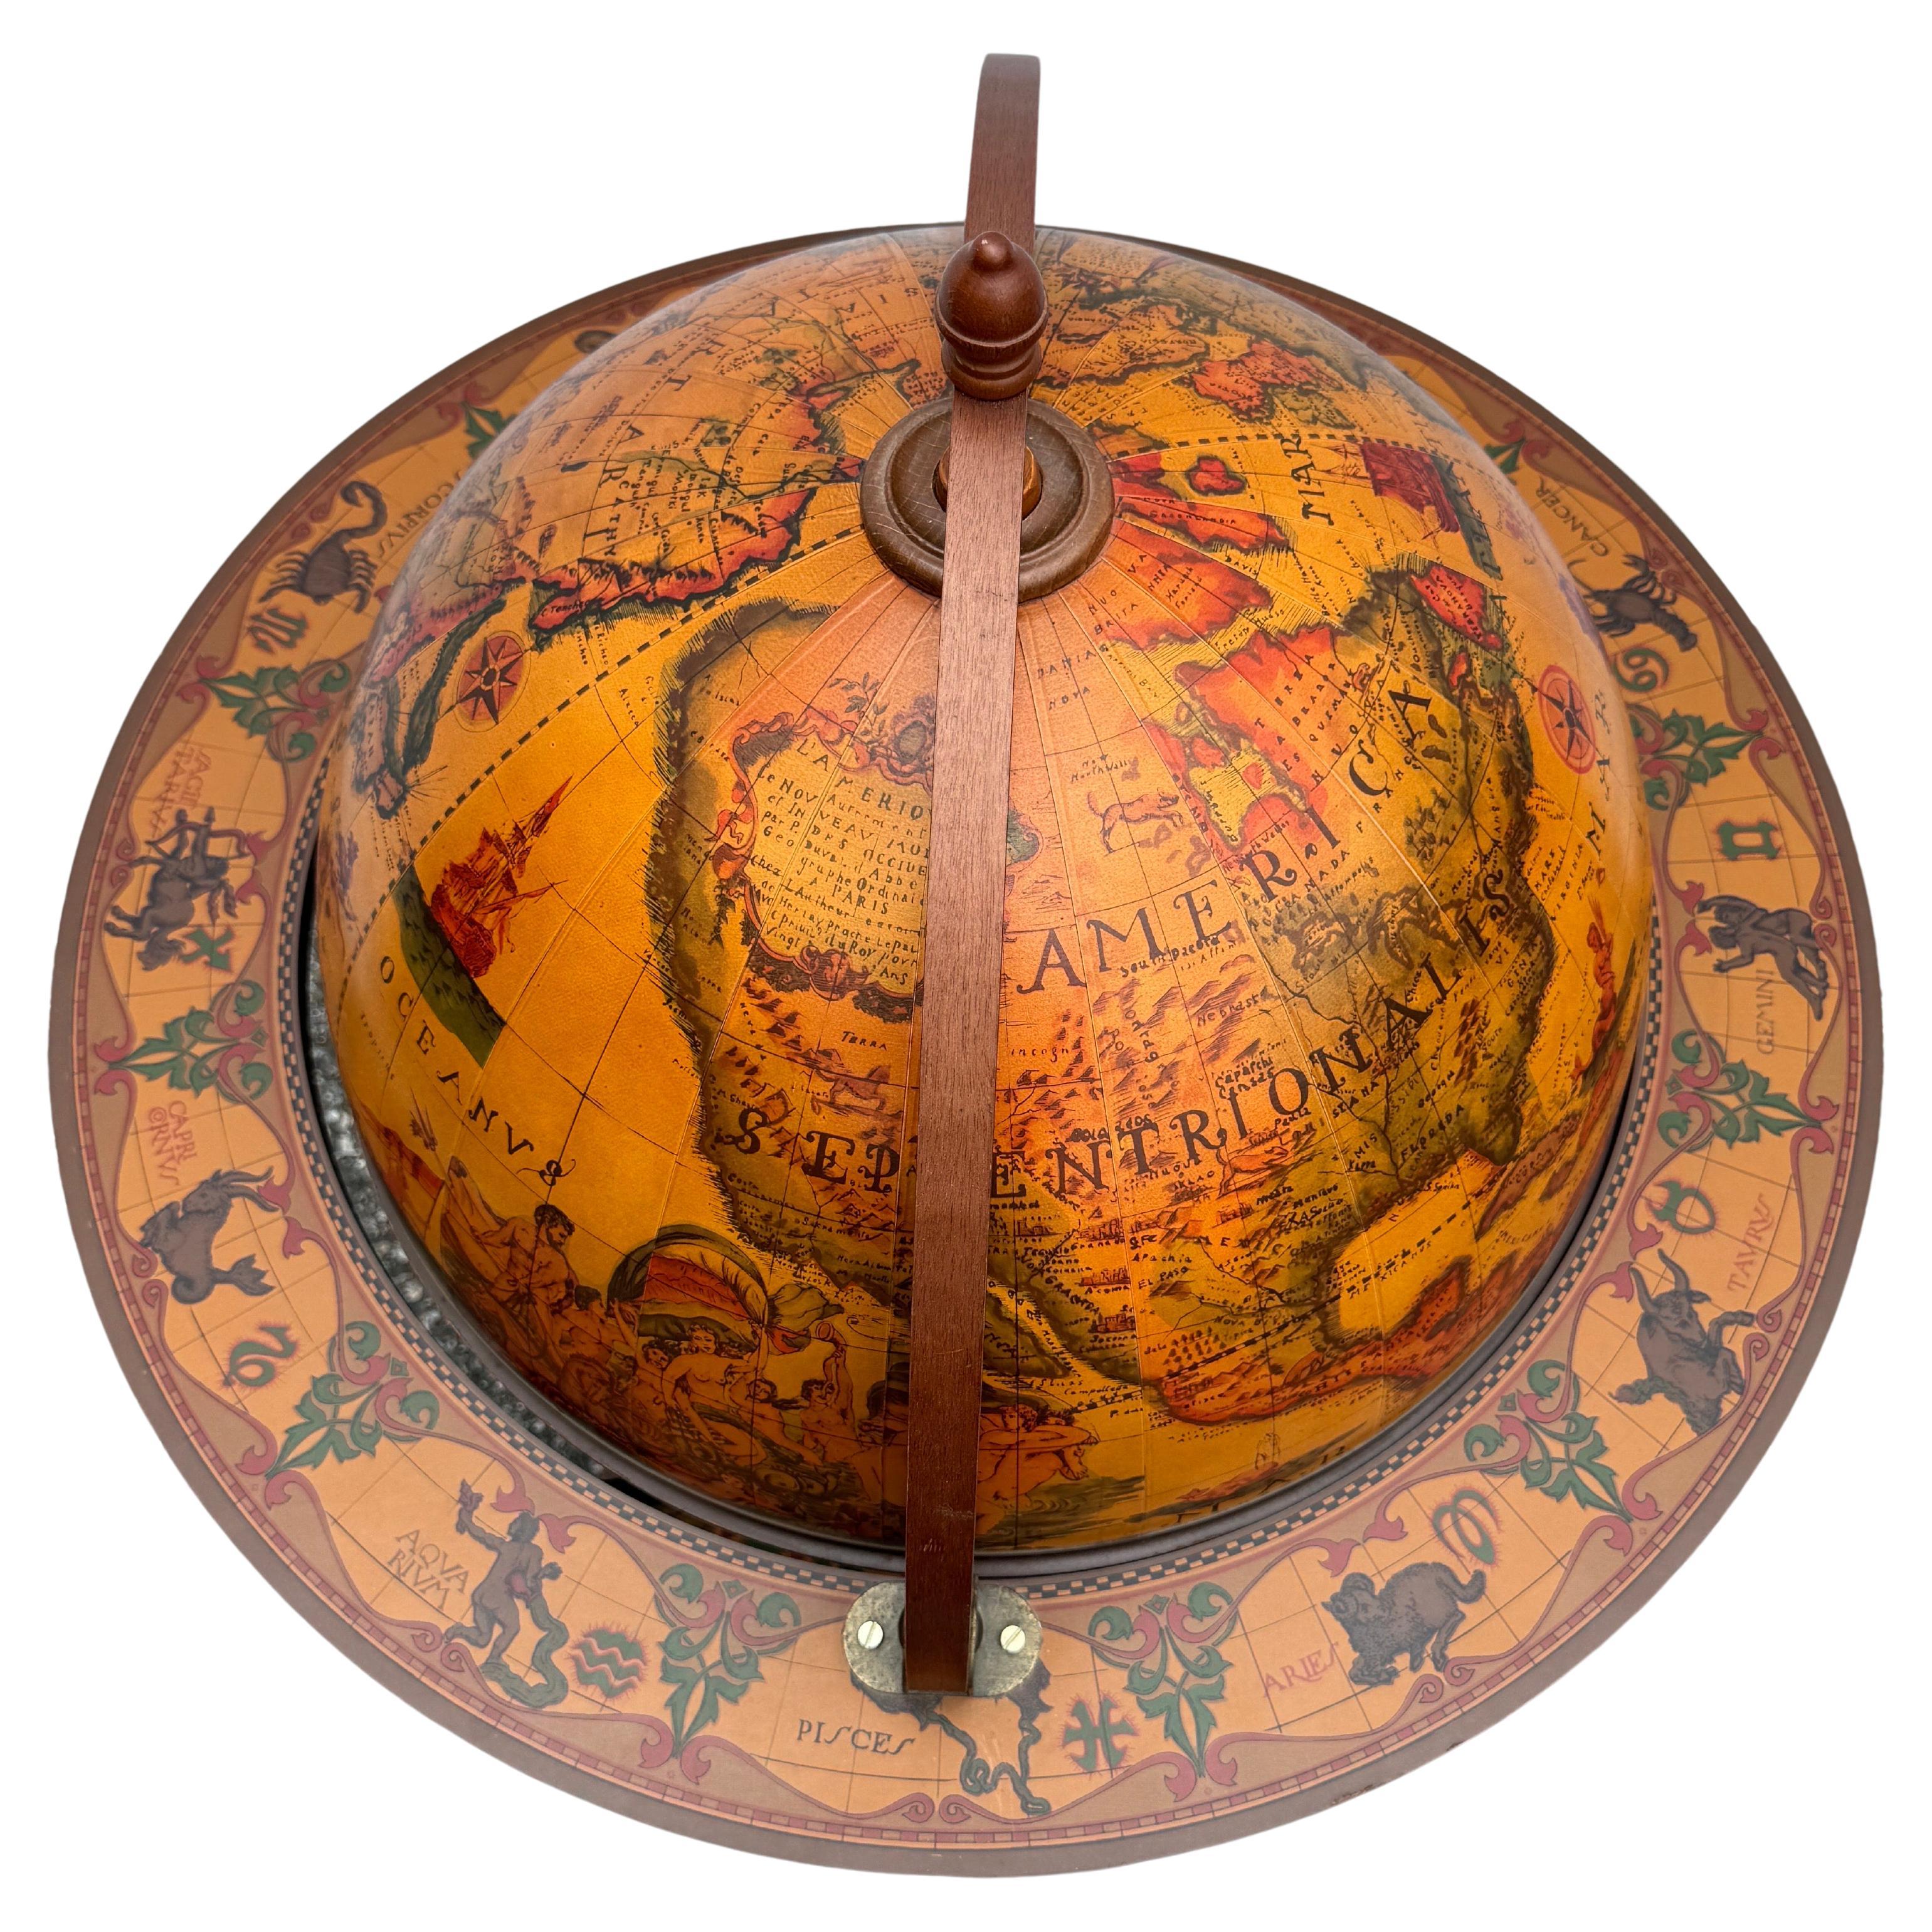 Impressive Italian dry bar from the 1960’s is perfect for adding a touch of classic European flair to your home. The globe is quite detailed with a paper decorated picturesque world map as well as zodiac signs around the frame. The piece is made of